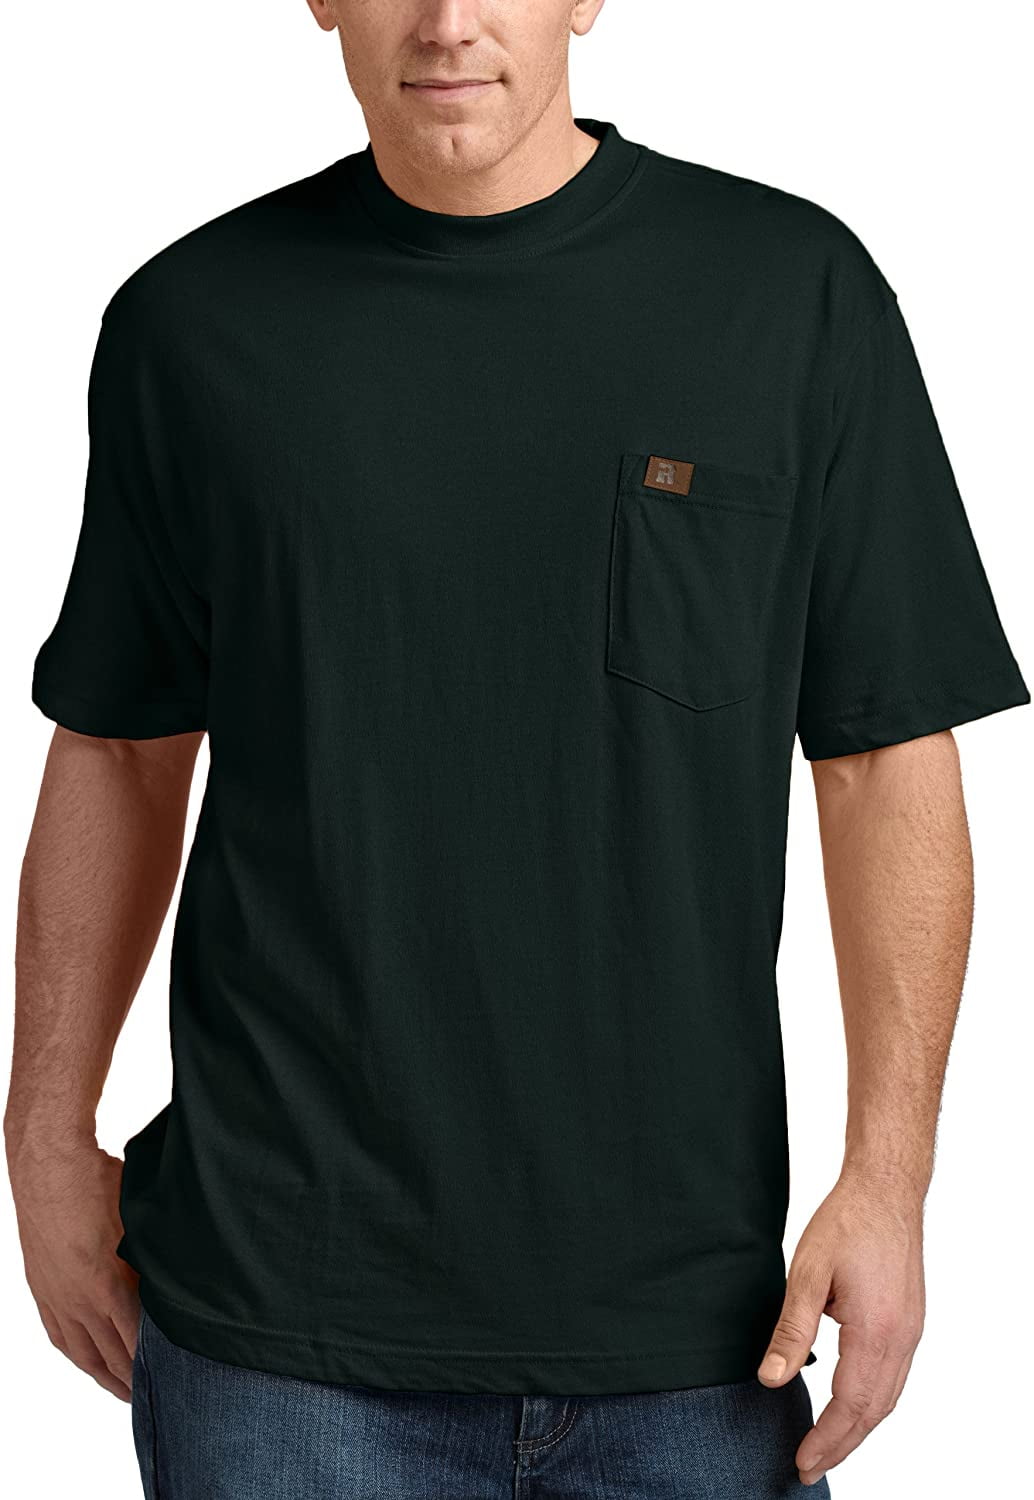 RIGGS WORKWEAR by Wrangler Men's Big & Tall Pocket T-Shirt, Forest ...